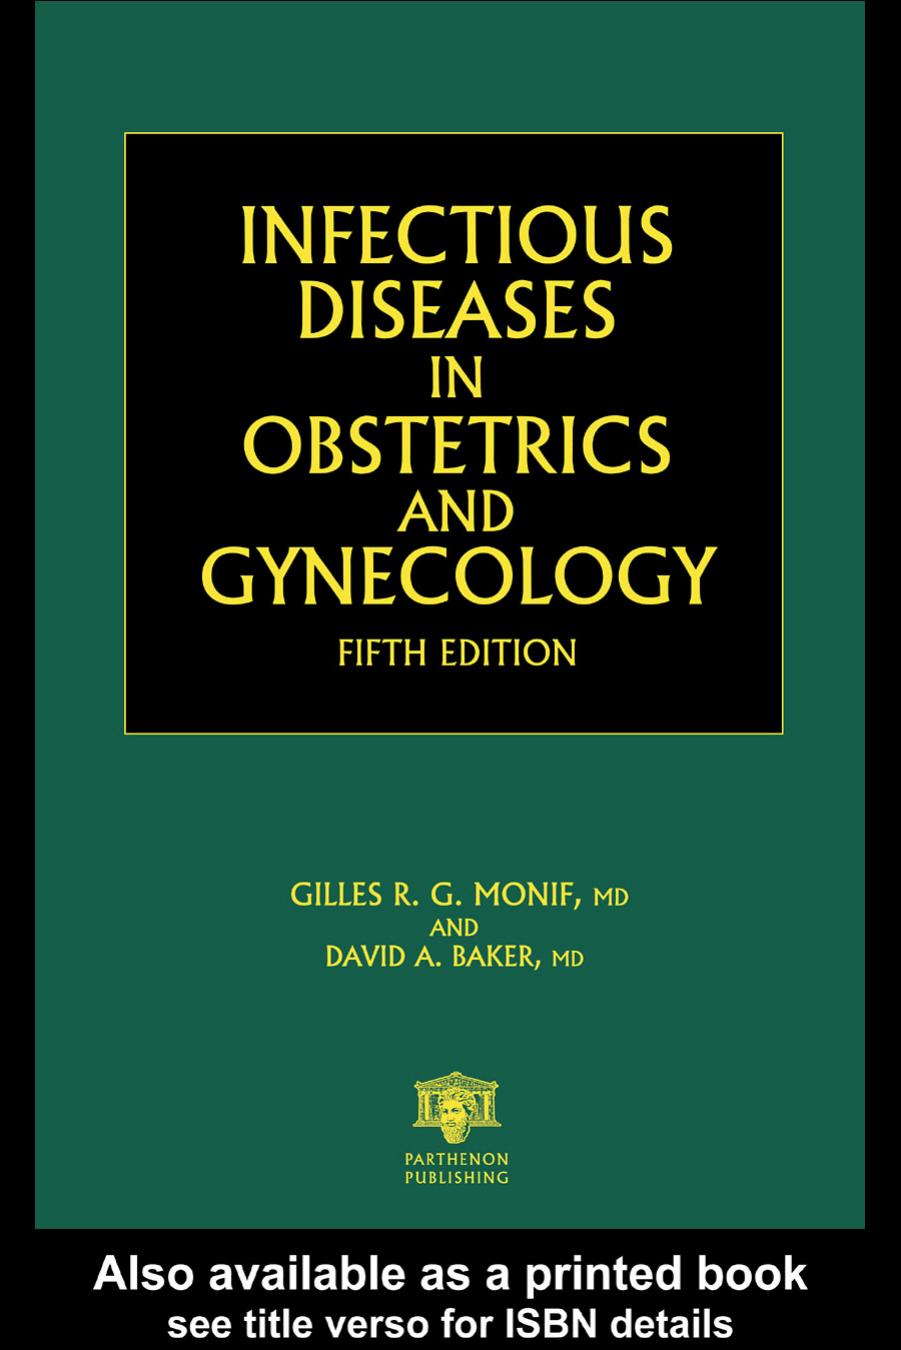 INFECTIOUS DISEASES IN OBSTETRICS AND GYNECOLOGY